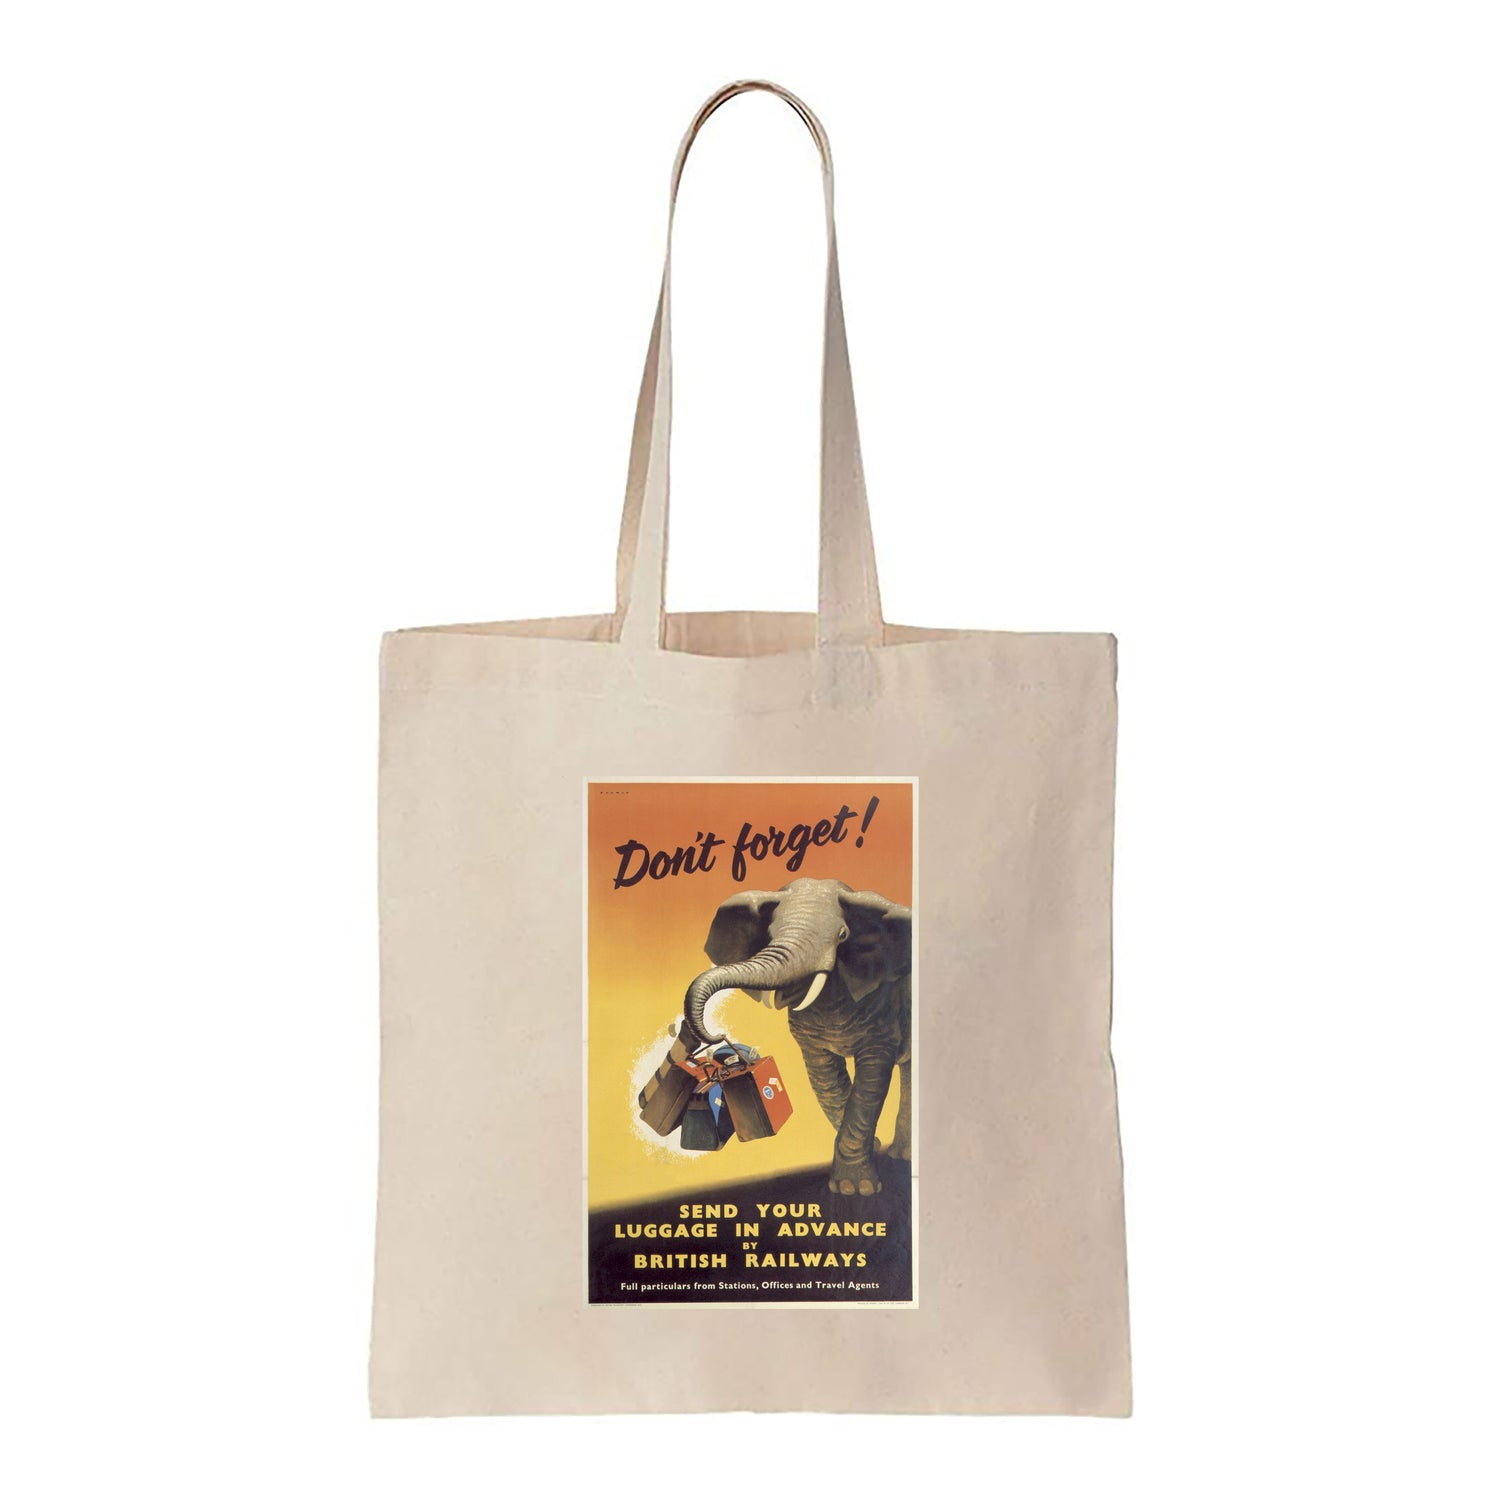 Send Your Luggage In Advance By British Railways - Canvas Tote Bag